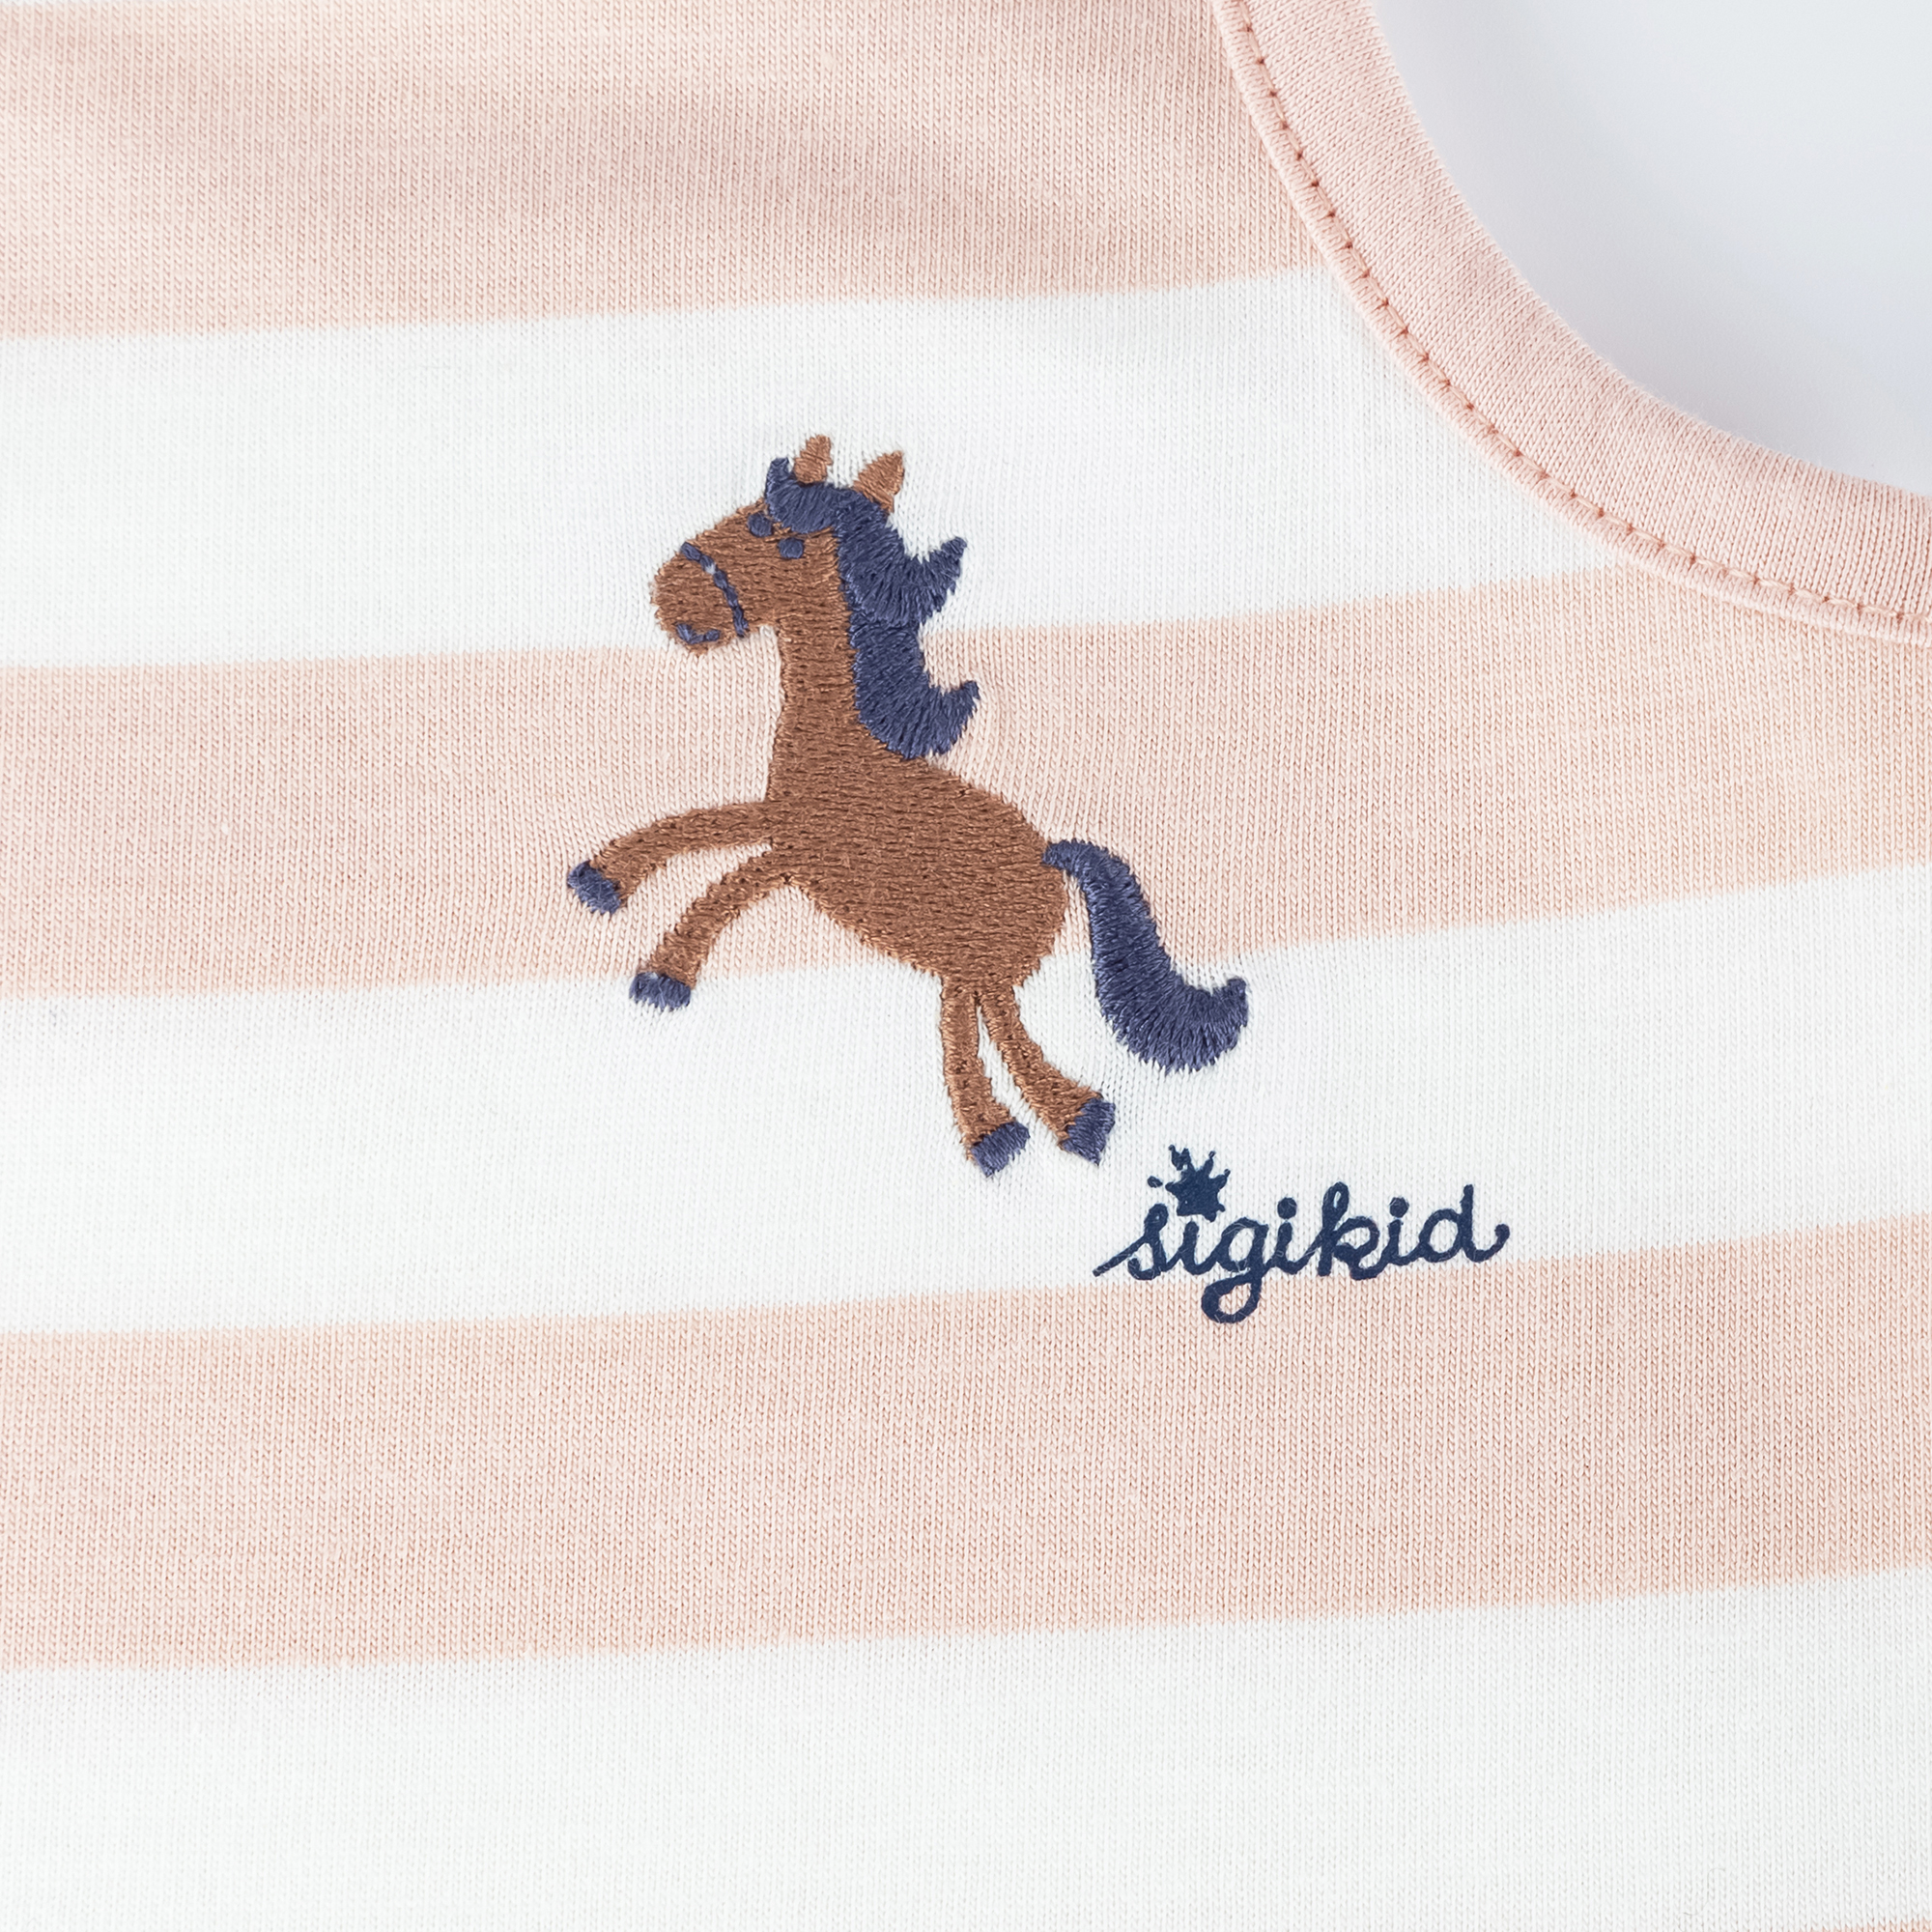 Children's bow detailing tank top Funny Horse, cream/pale pink